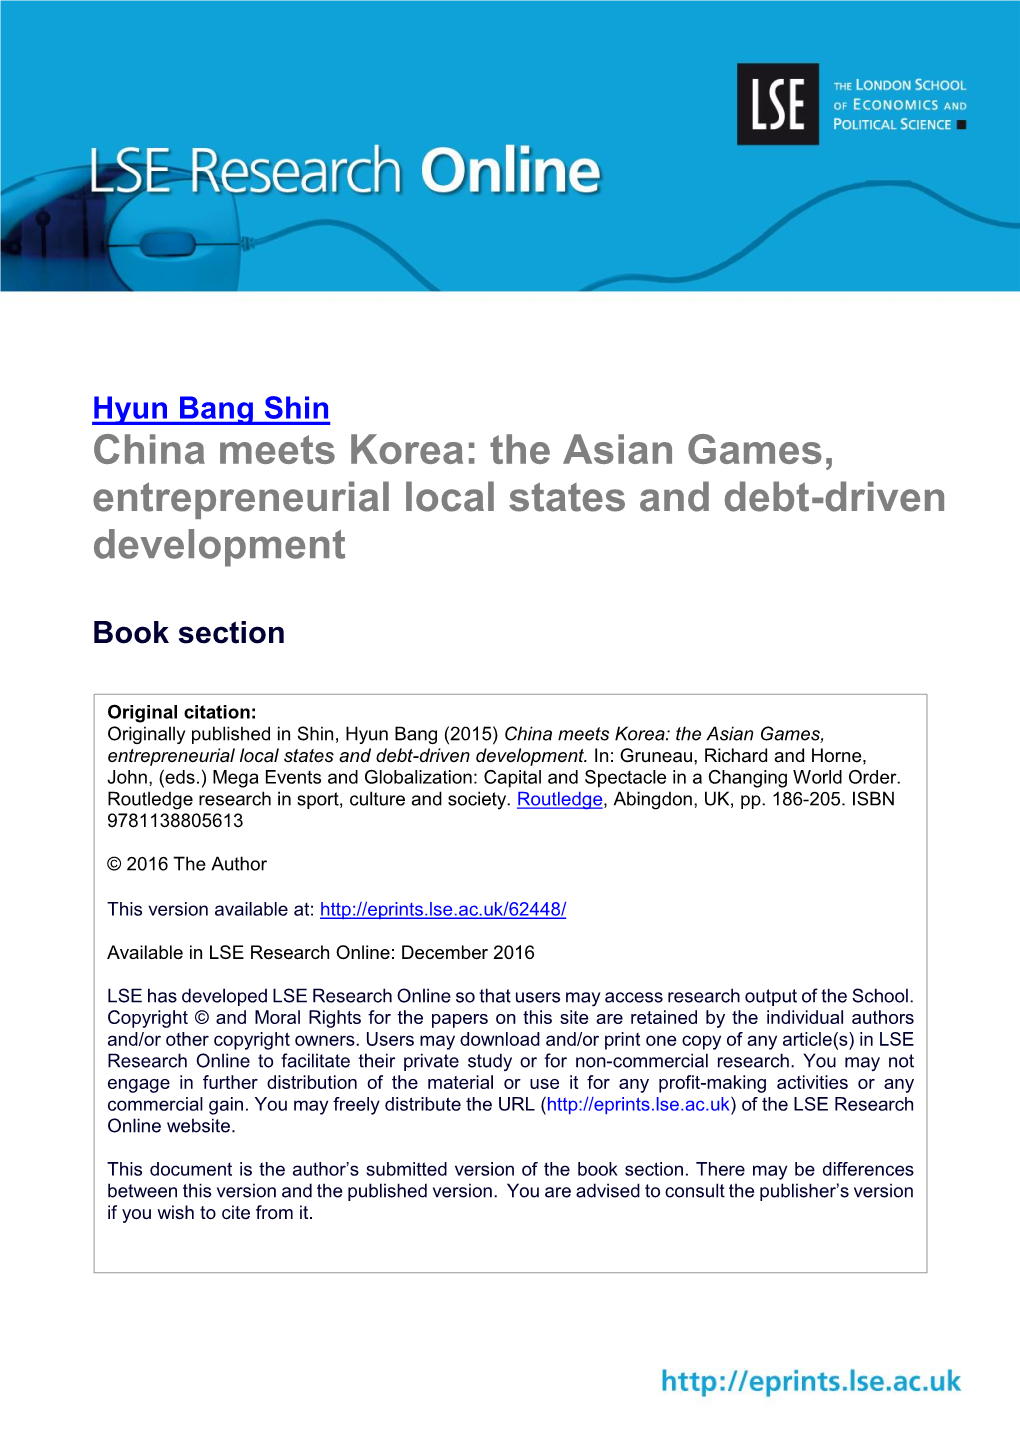 China Meets Korea: the Asian Games, Entrepreneurial Local States and Debt-Driven Development